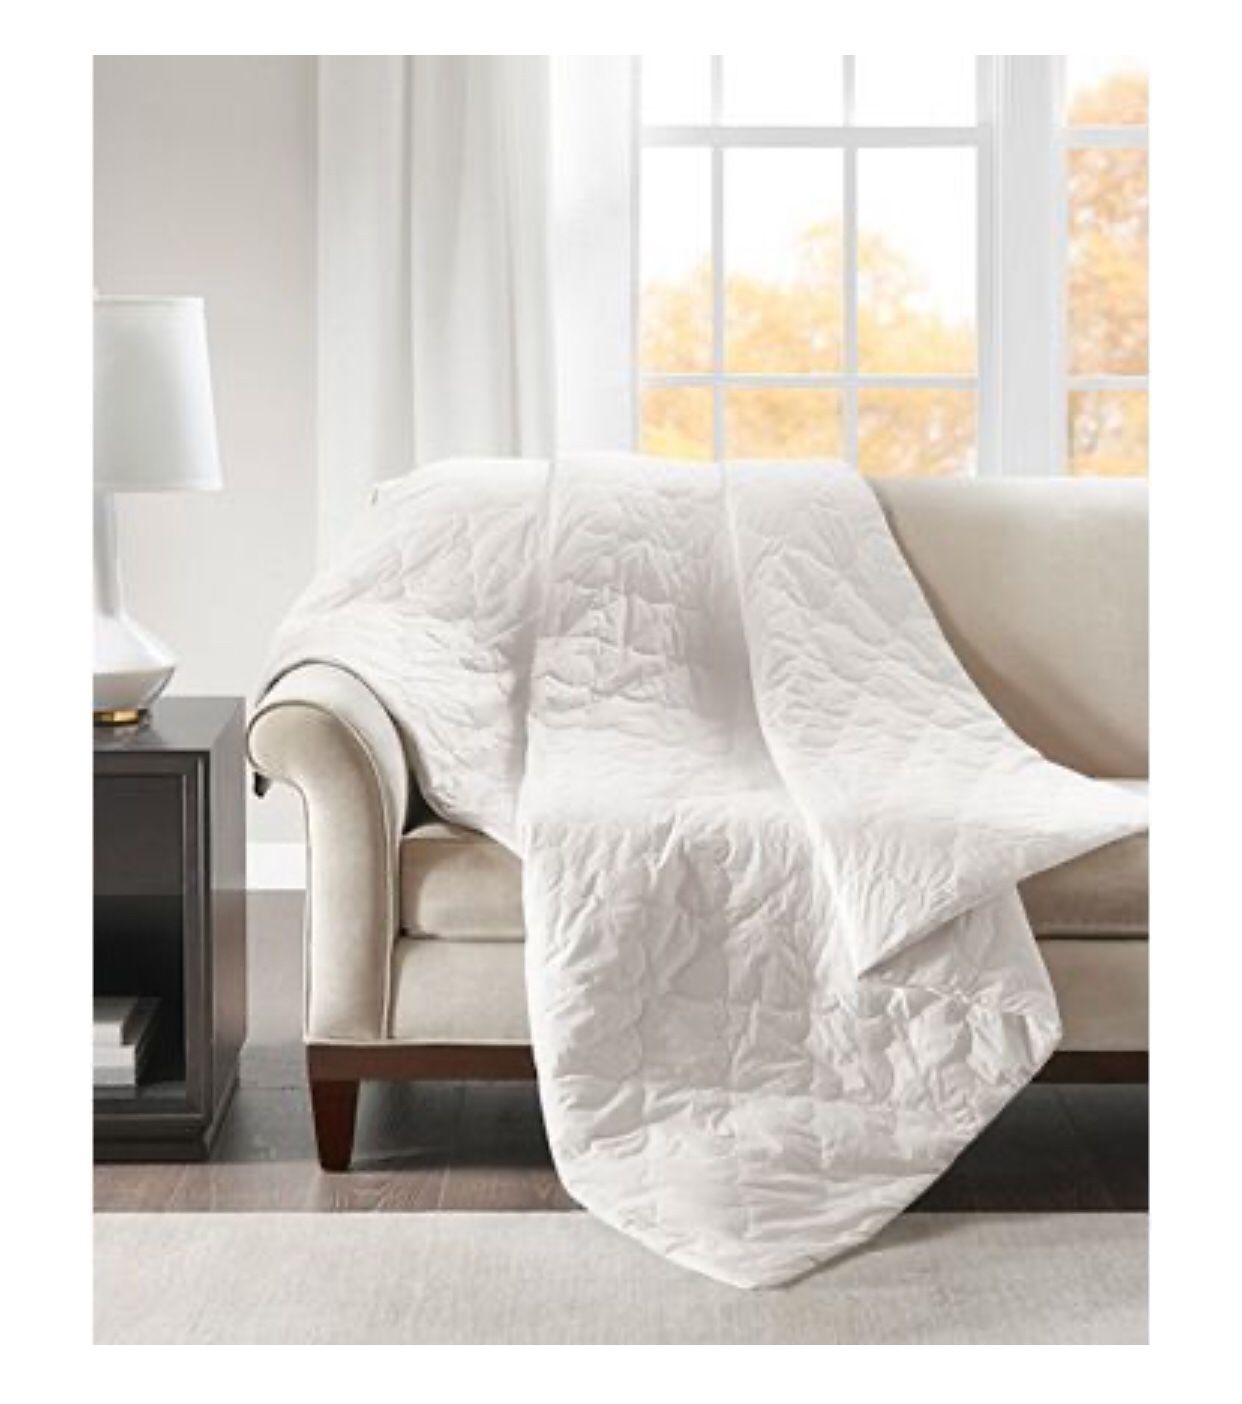 *New* Beautyrest Weighted Blanket Quilted Cotton